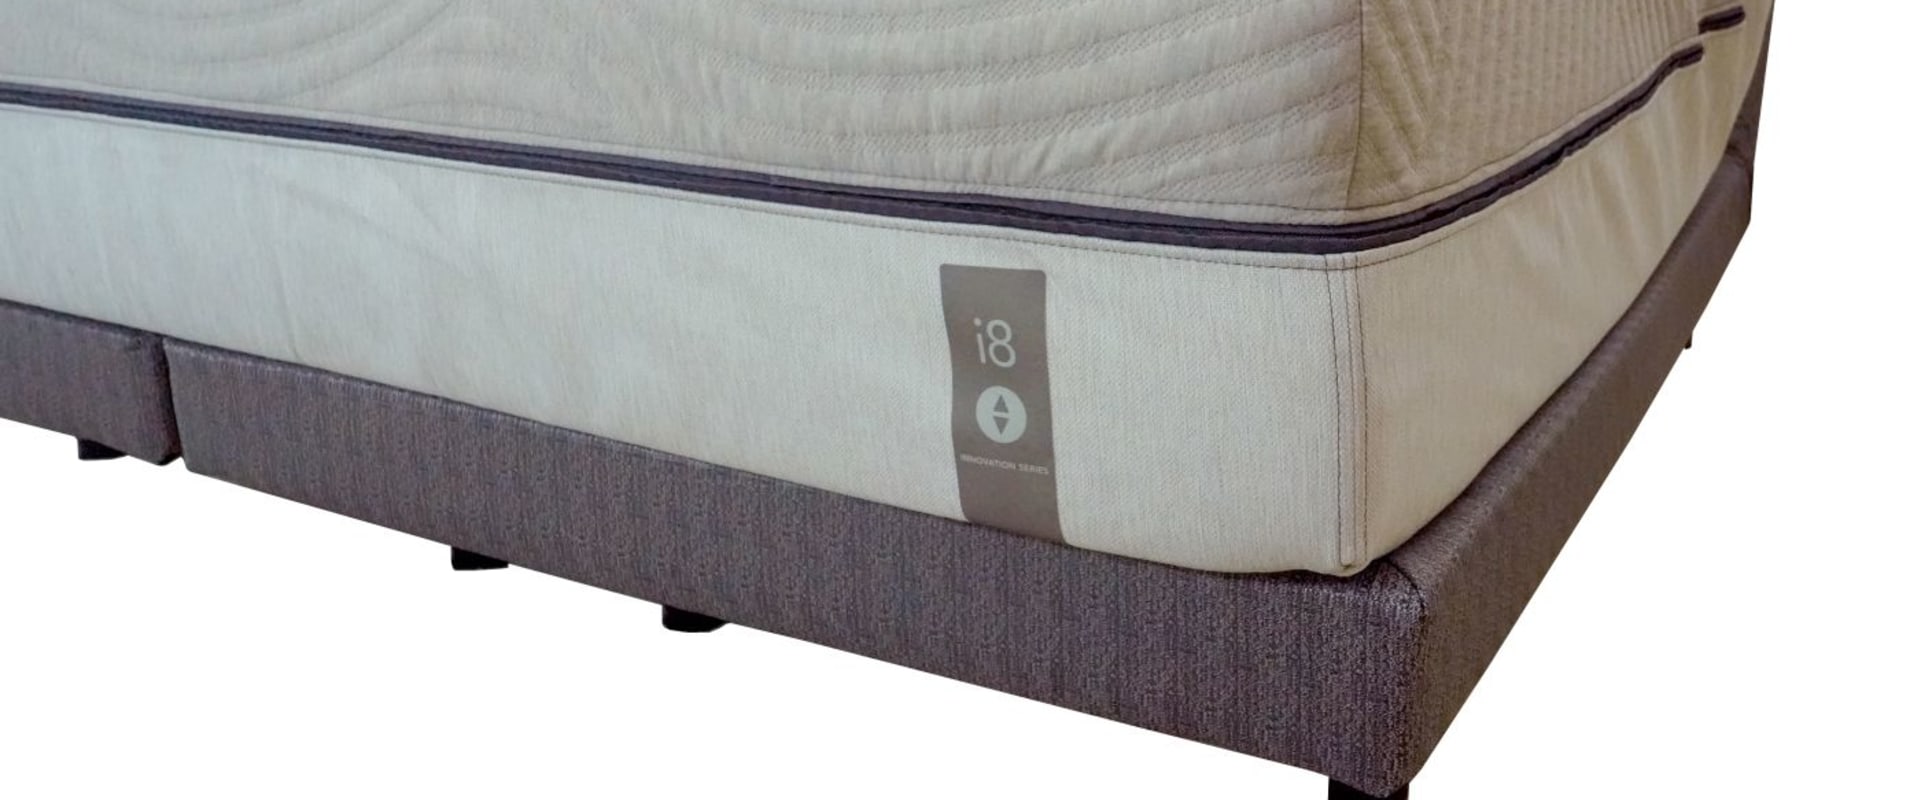 Are Sleep Number Beds Safe for Your Health?